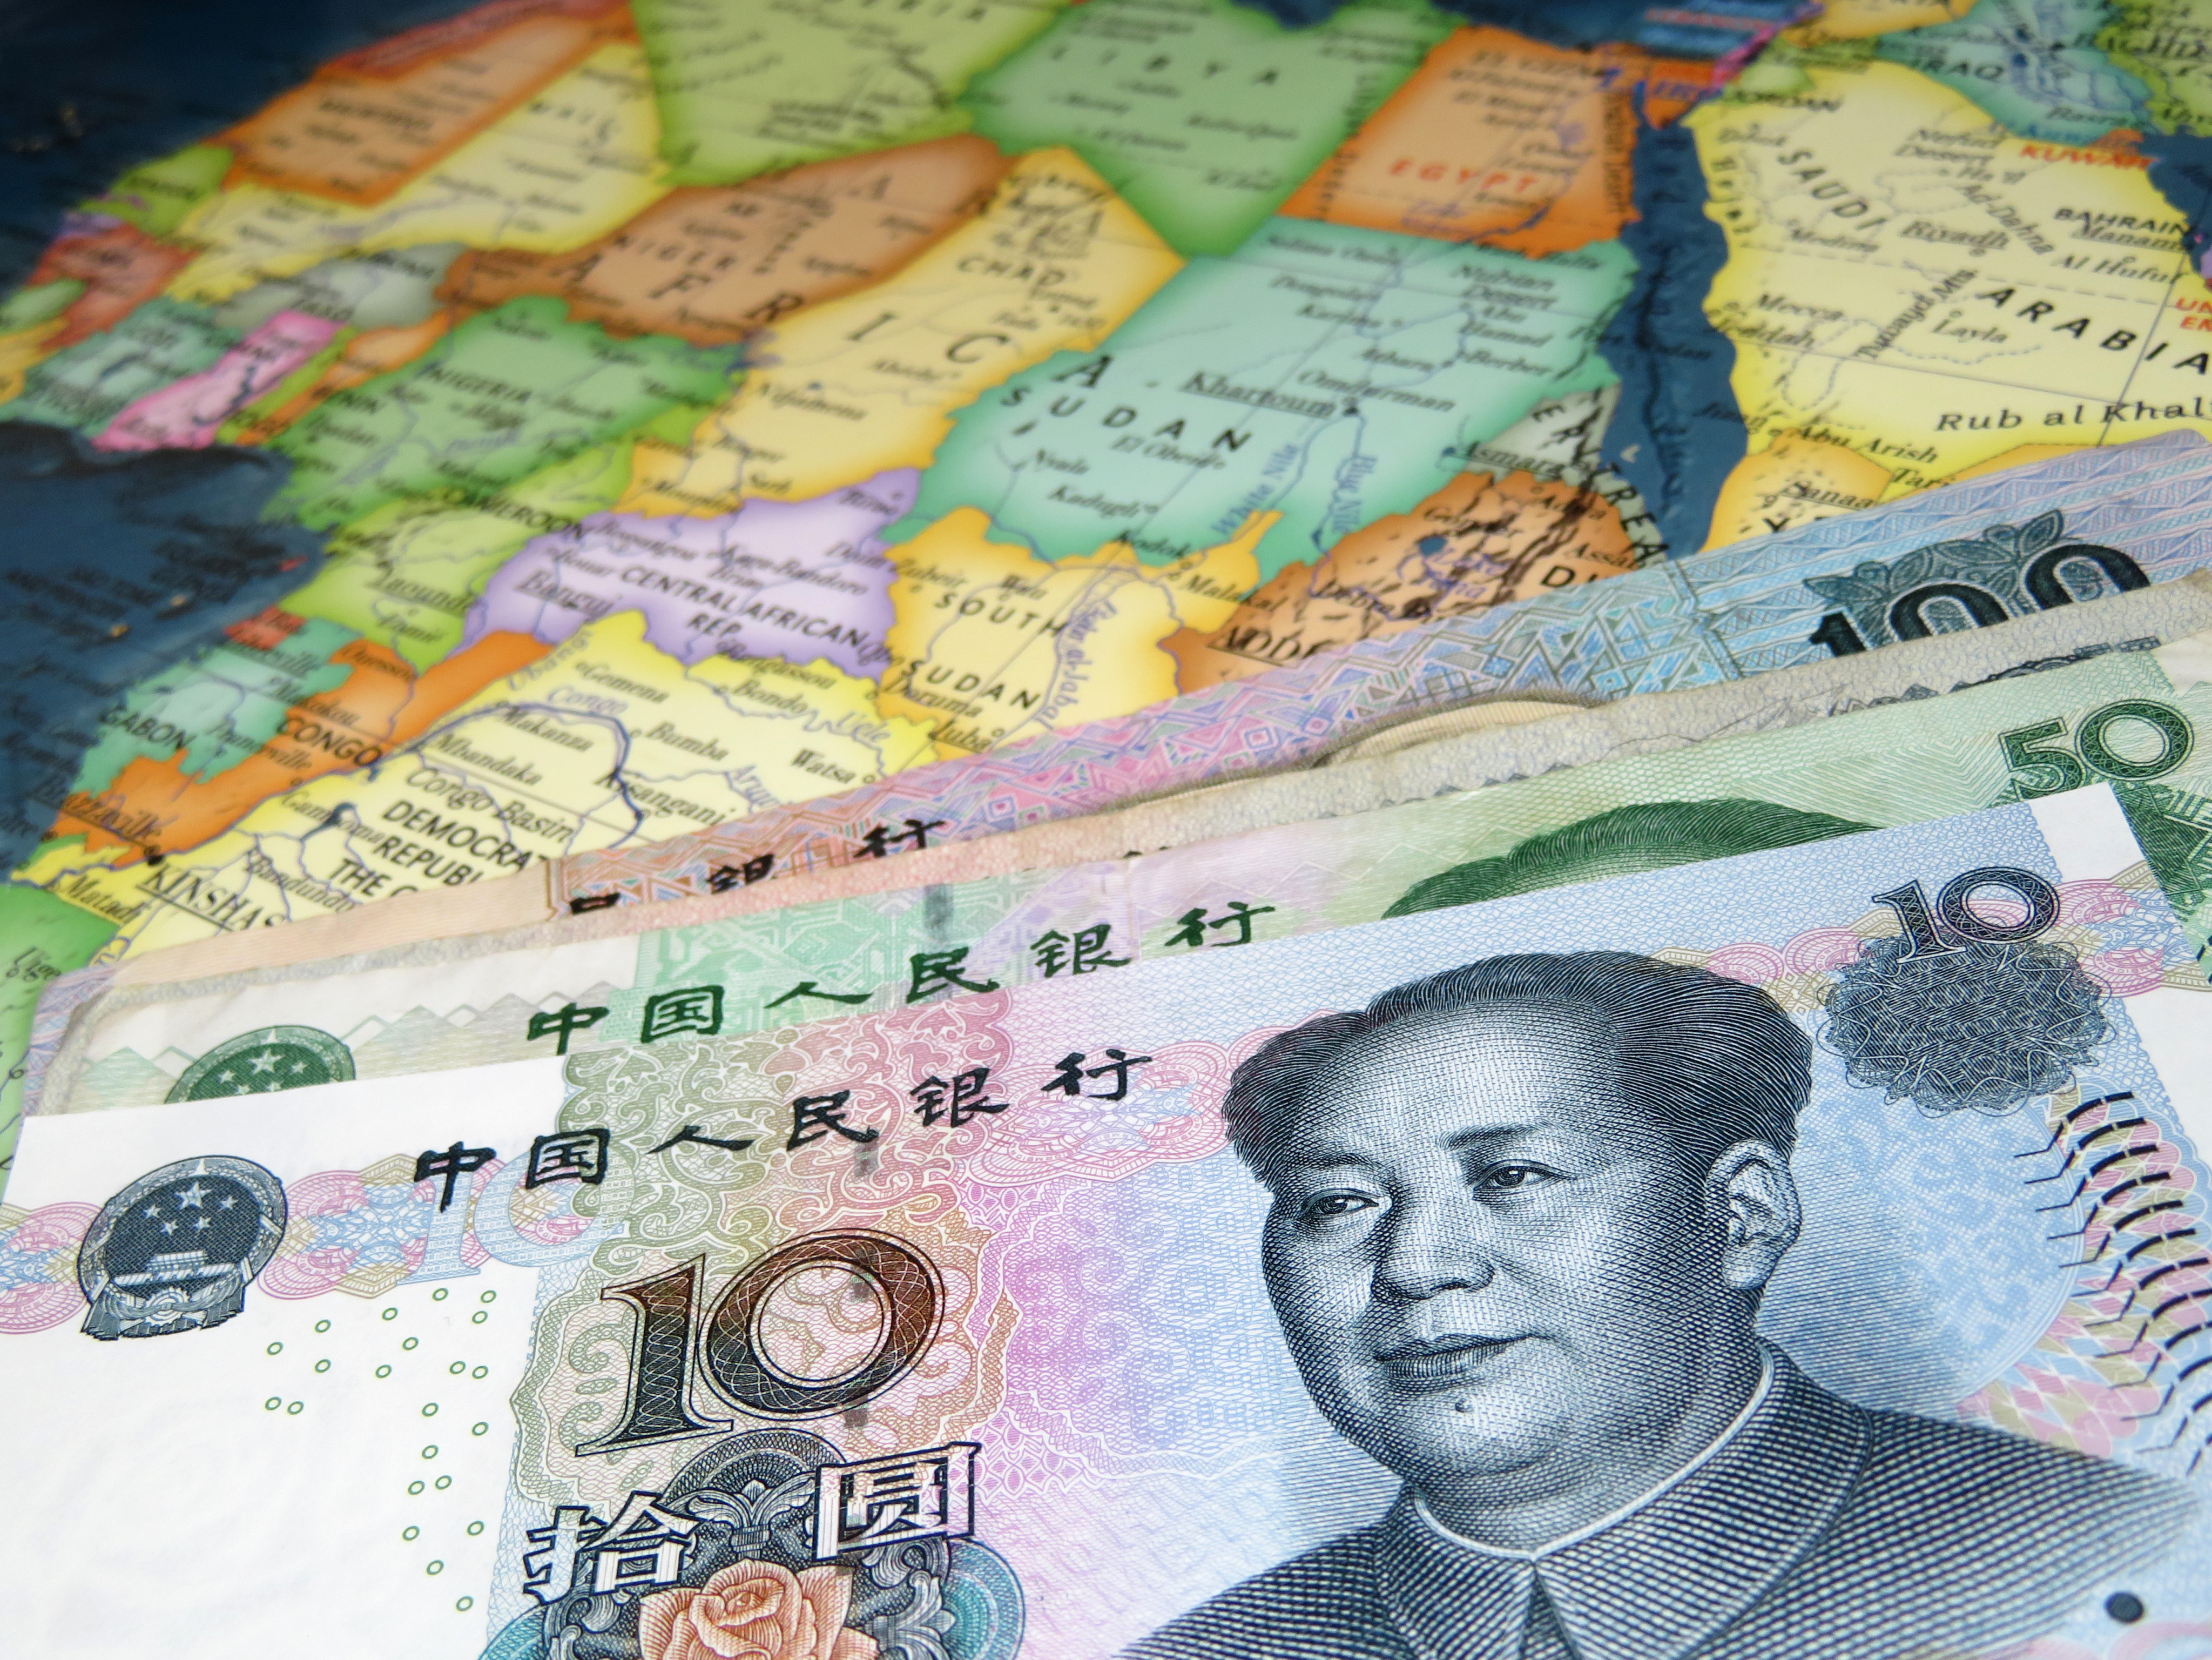 Beijing says 23 countries, including 16 in Africa, benefited from China’s role in the G20 Debt Service Suspension Initiative. Photo: Shutterstock